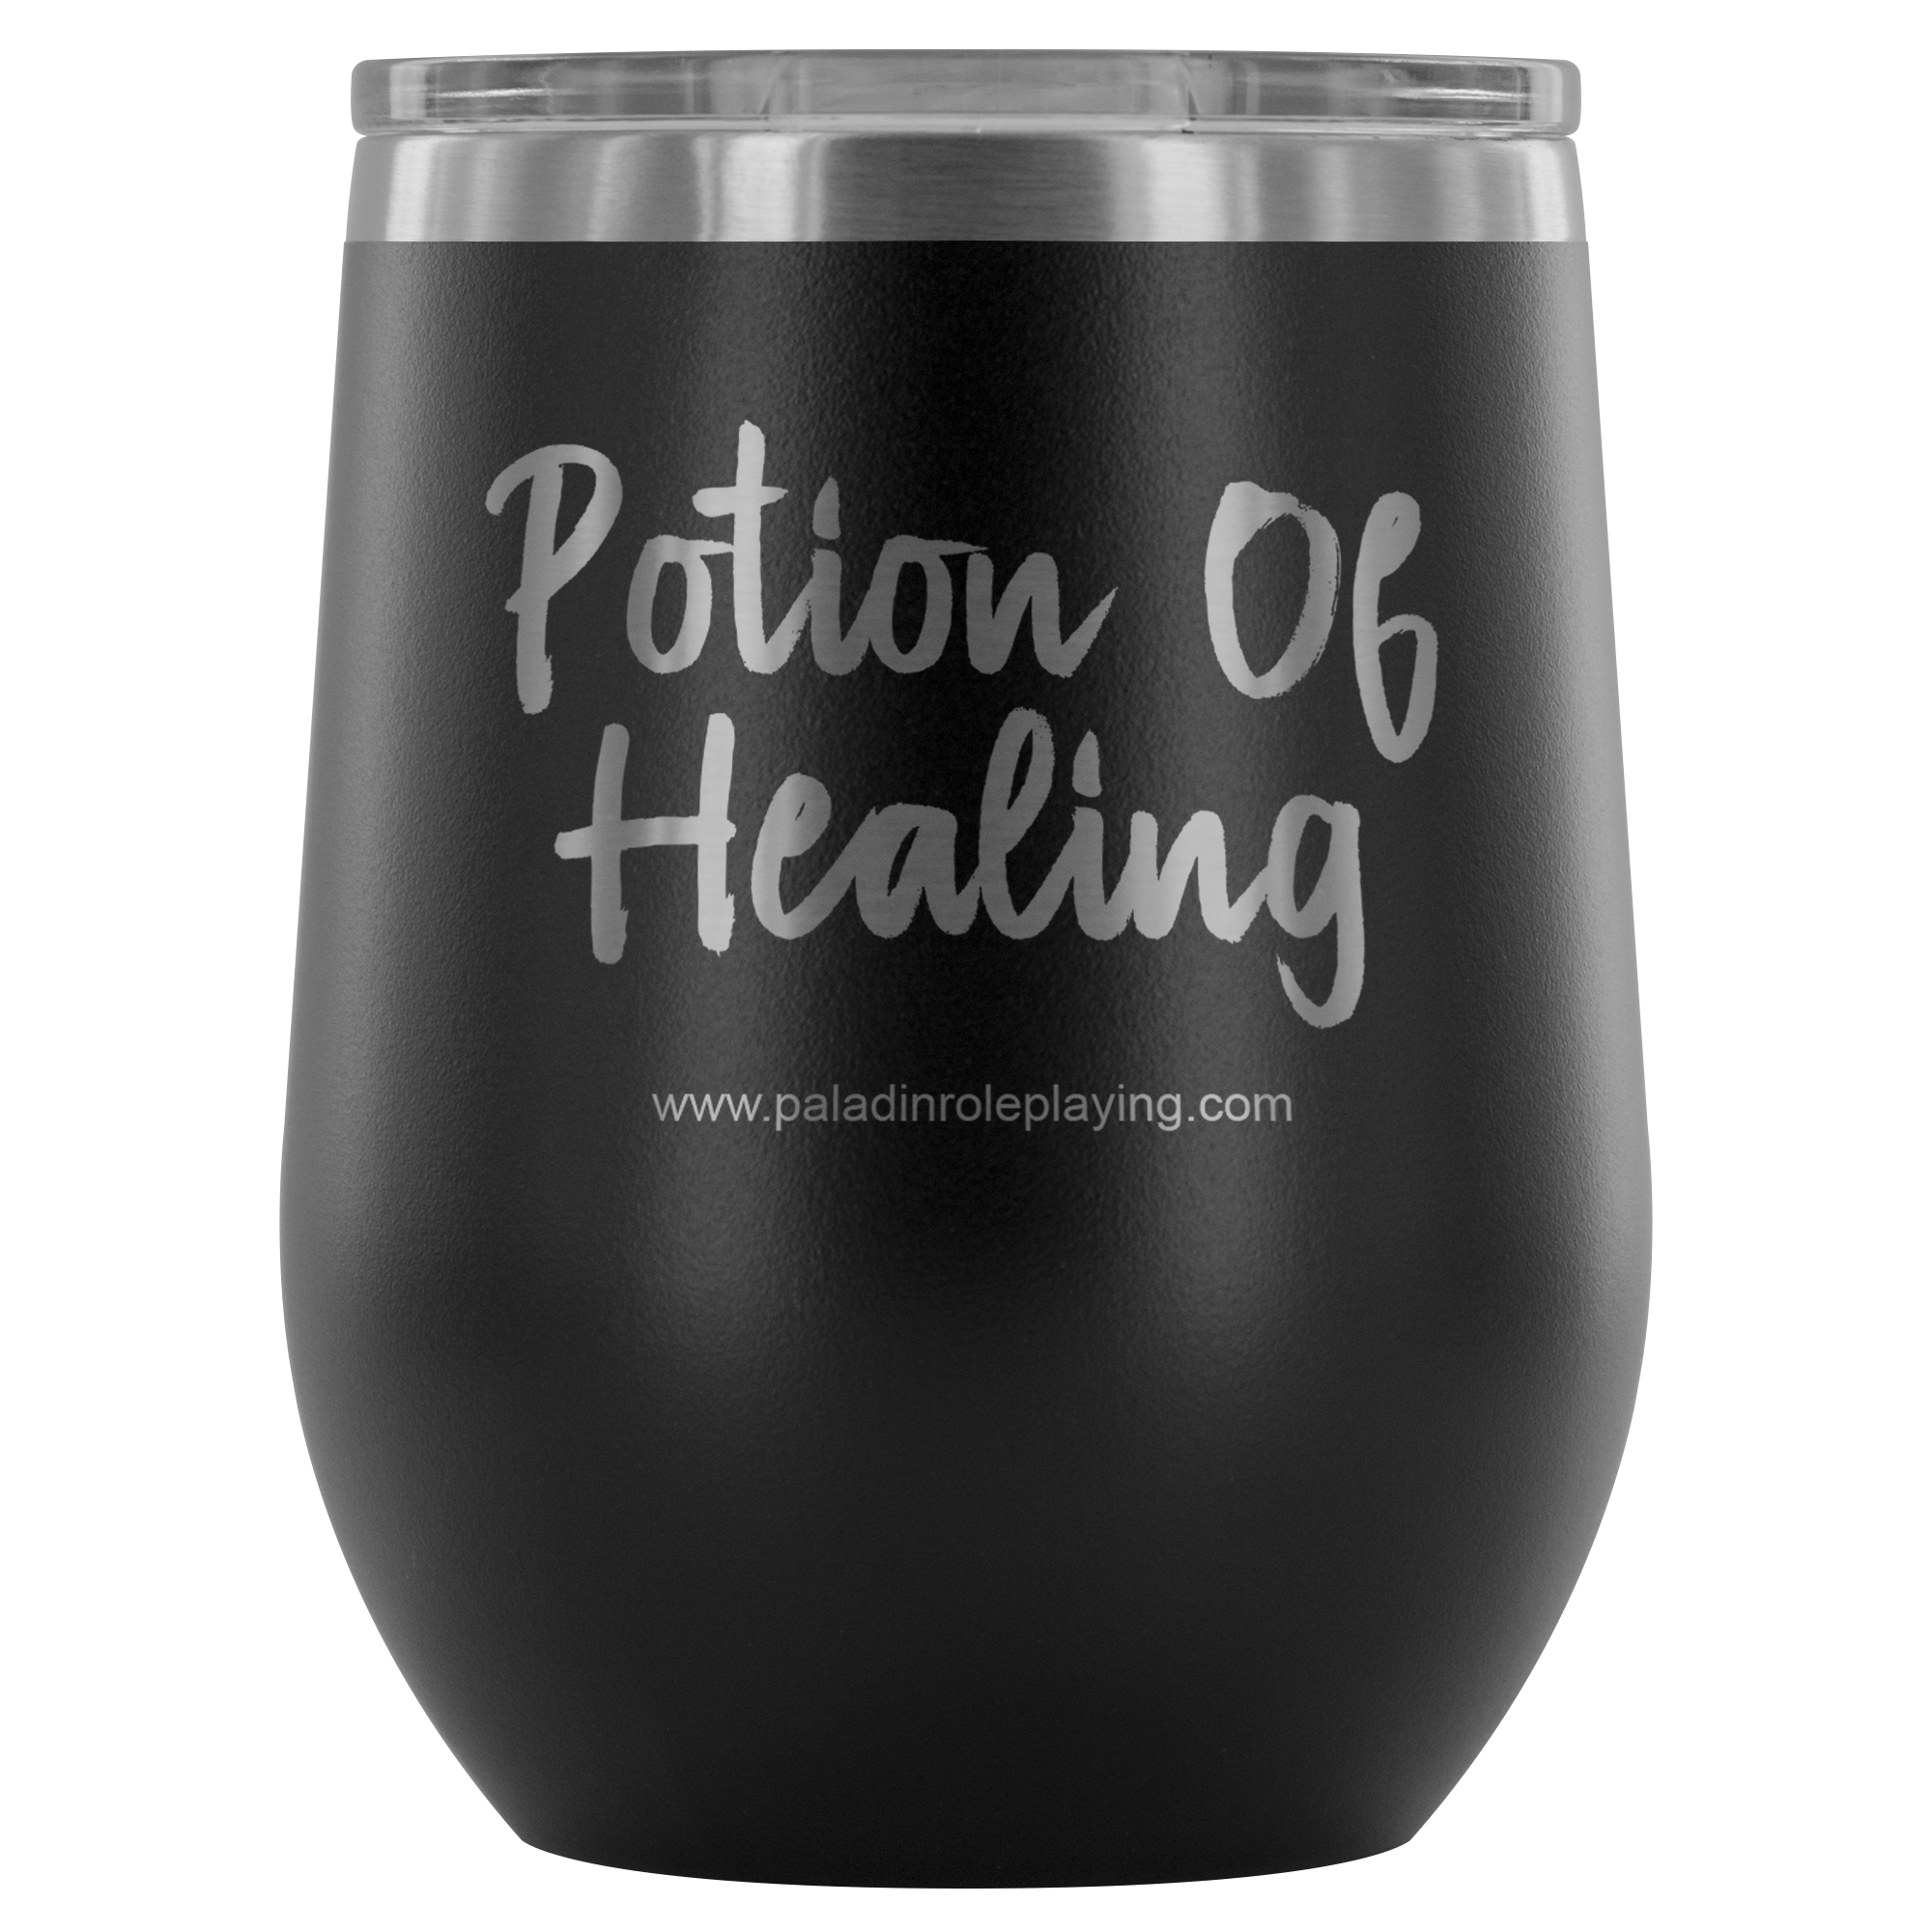 Potion Of Healing Insulated Tumbler - Paladin Roleplaying